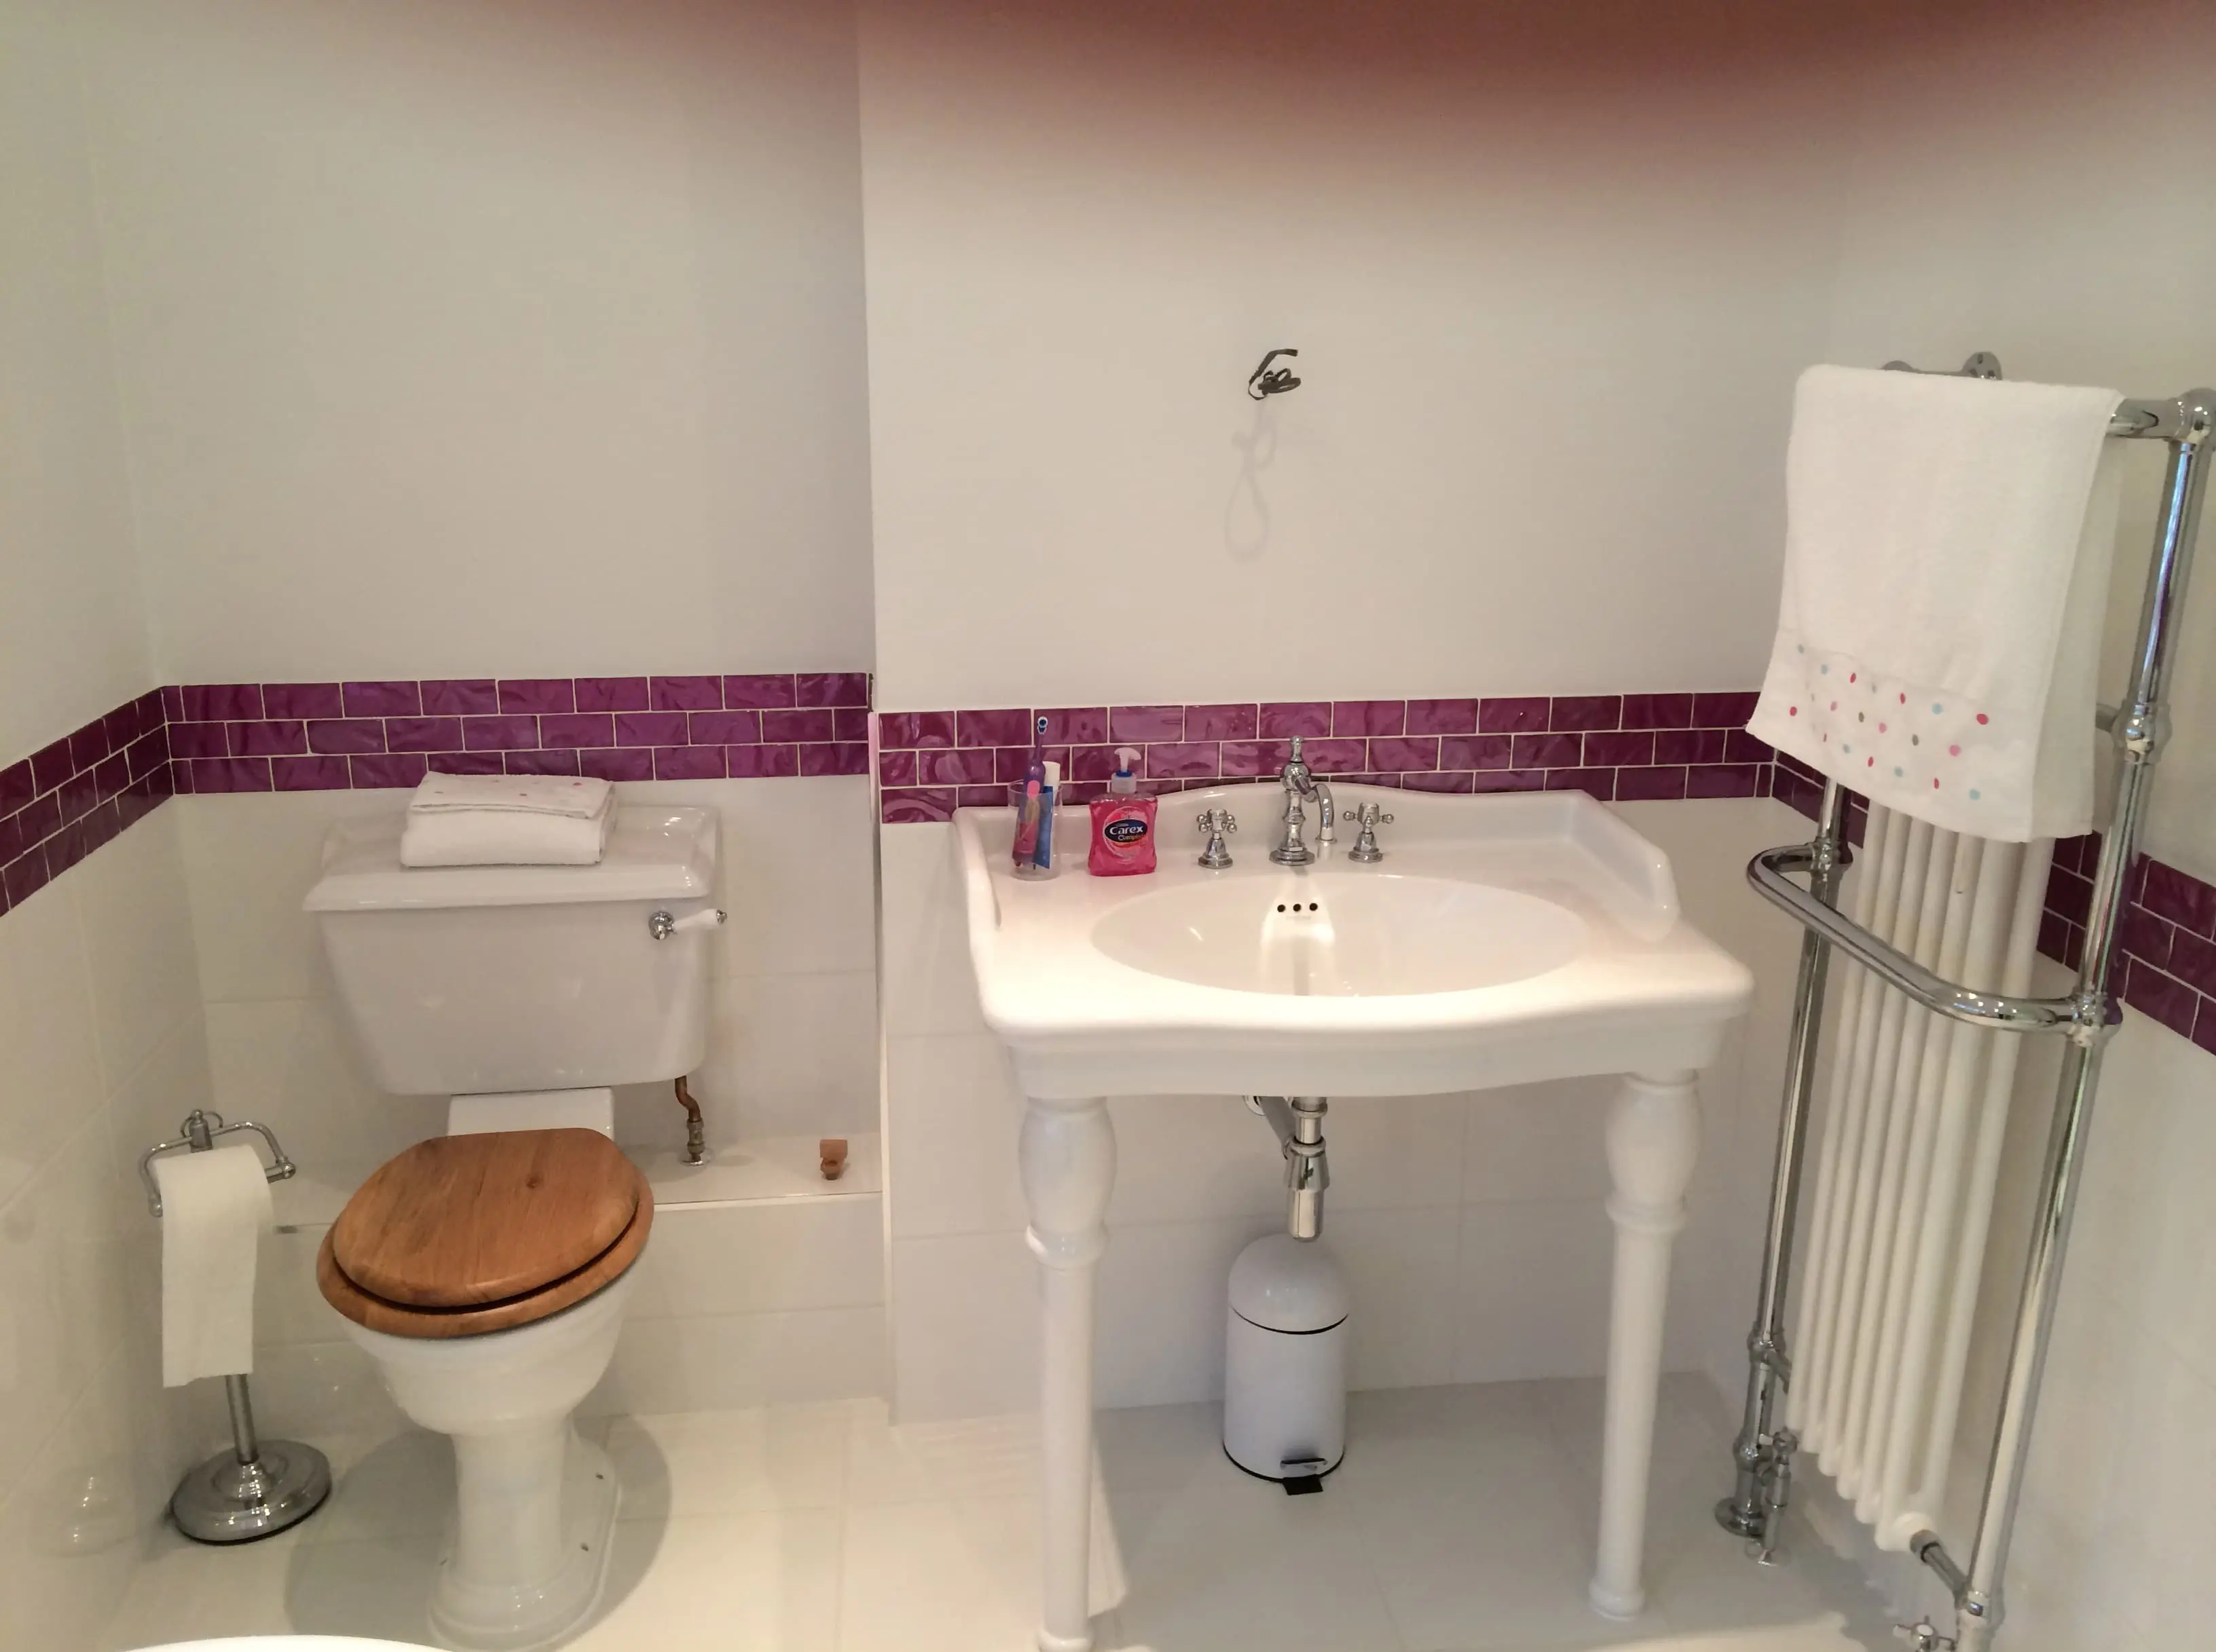 With over 42 years of experience, Plumbing 4 U can supply and fit bathroom fittings at competitive prices in the following areas:Lower EarleyShinfieldCalcotWokinghamBracknellWoodleyAnd many areas in and around Reading!Whether you want me to install a new wet room or just re-tile your existing bathroom, I can give your home a new look. I take great pride in providing a personalised service to&nbsp;suit your budget and taste.&nbsp;